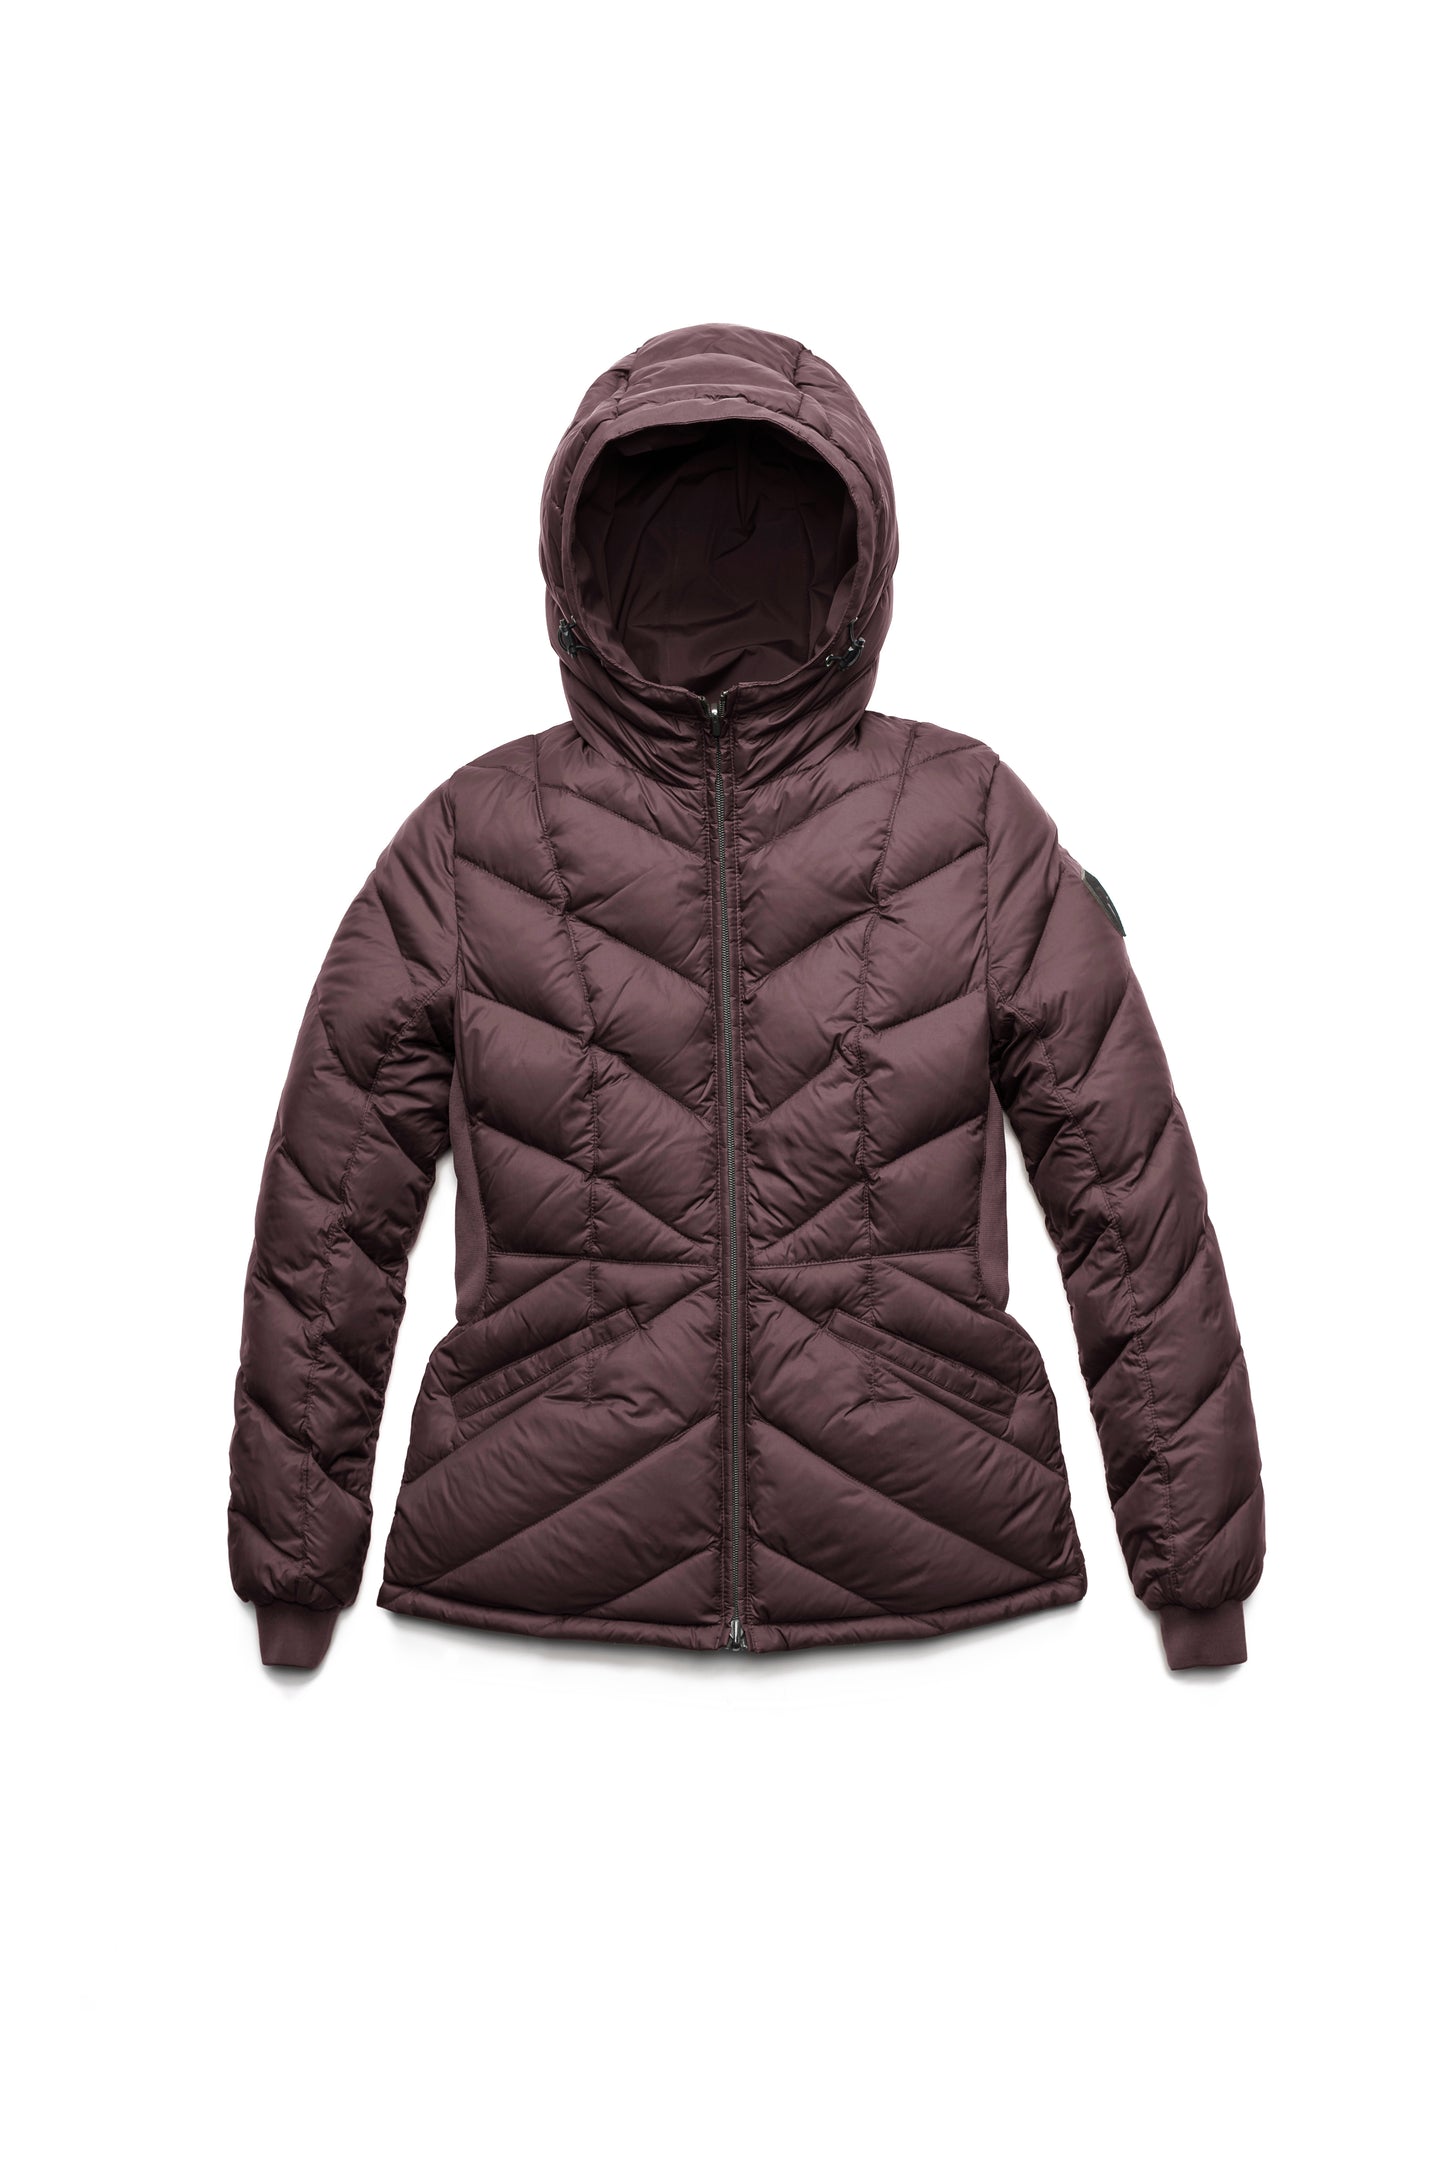 A women's two in one reversible hip length down jacket, one side is quilted and one side is solid waterproof fabric in Burgundy